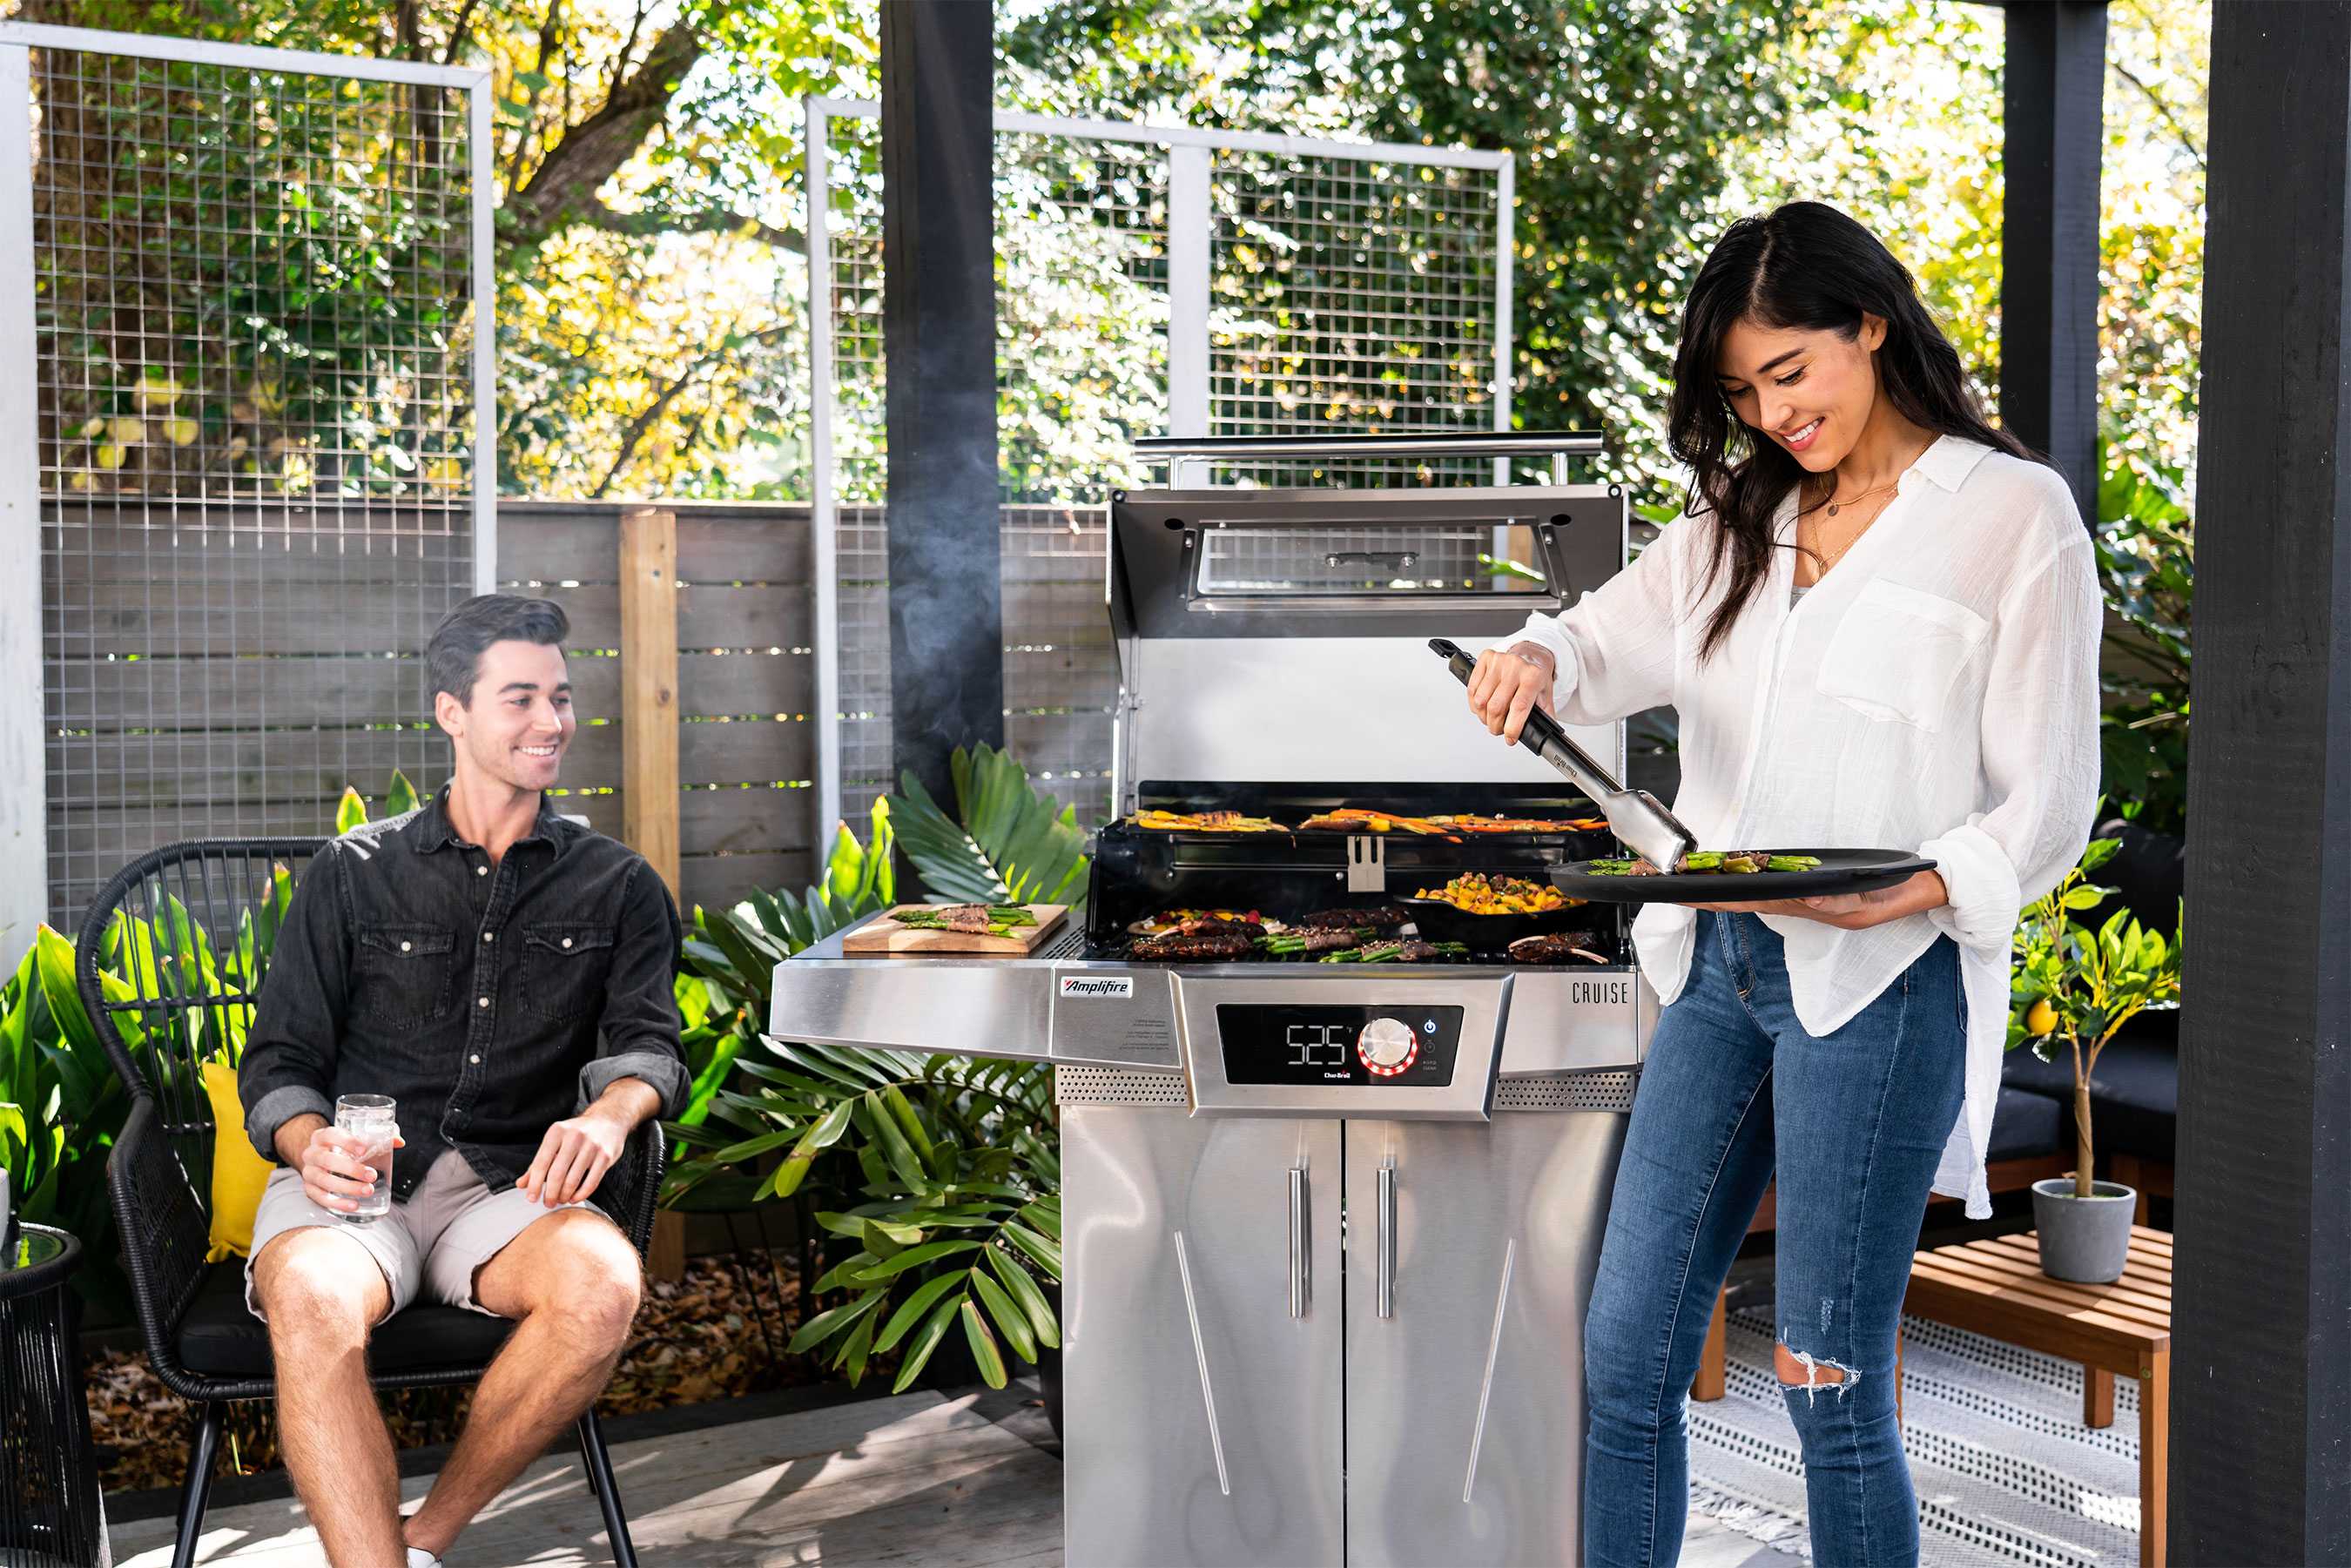 The Cruise gas grill delivers an incredible temperature range with a MAX Mode capable of delivering 700+ degrees of heat across 540 square inches of cooking space for steakhouse-quality searing.